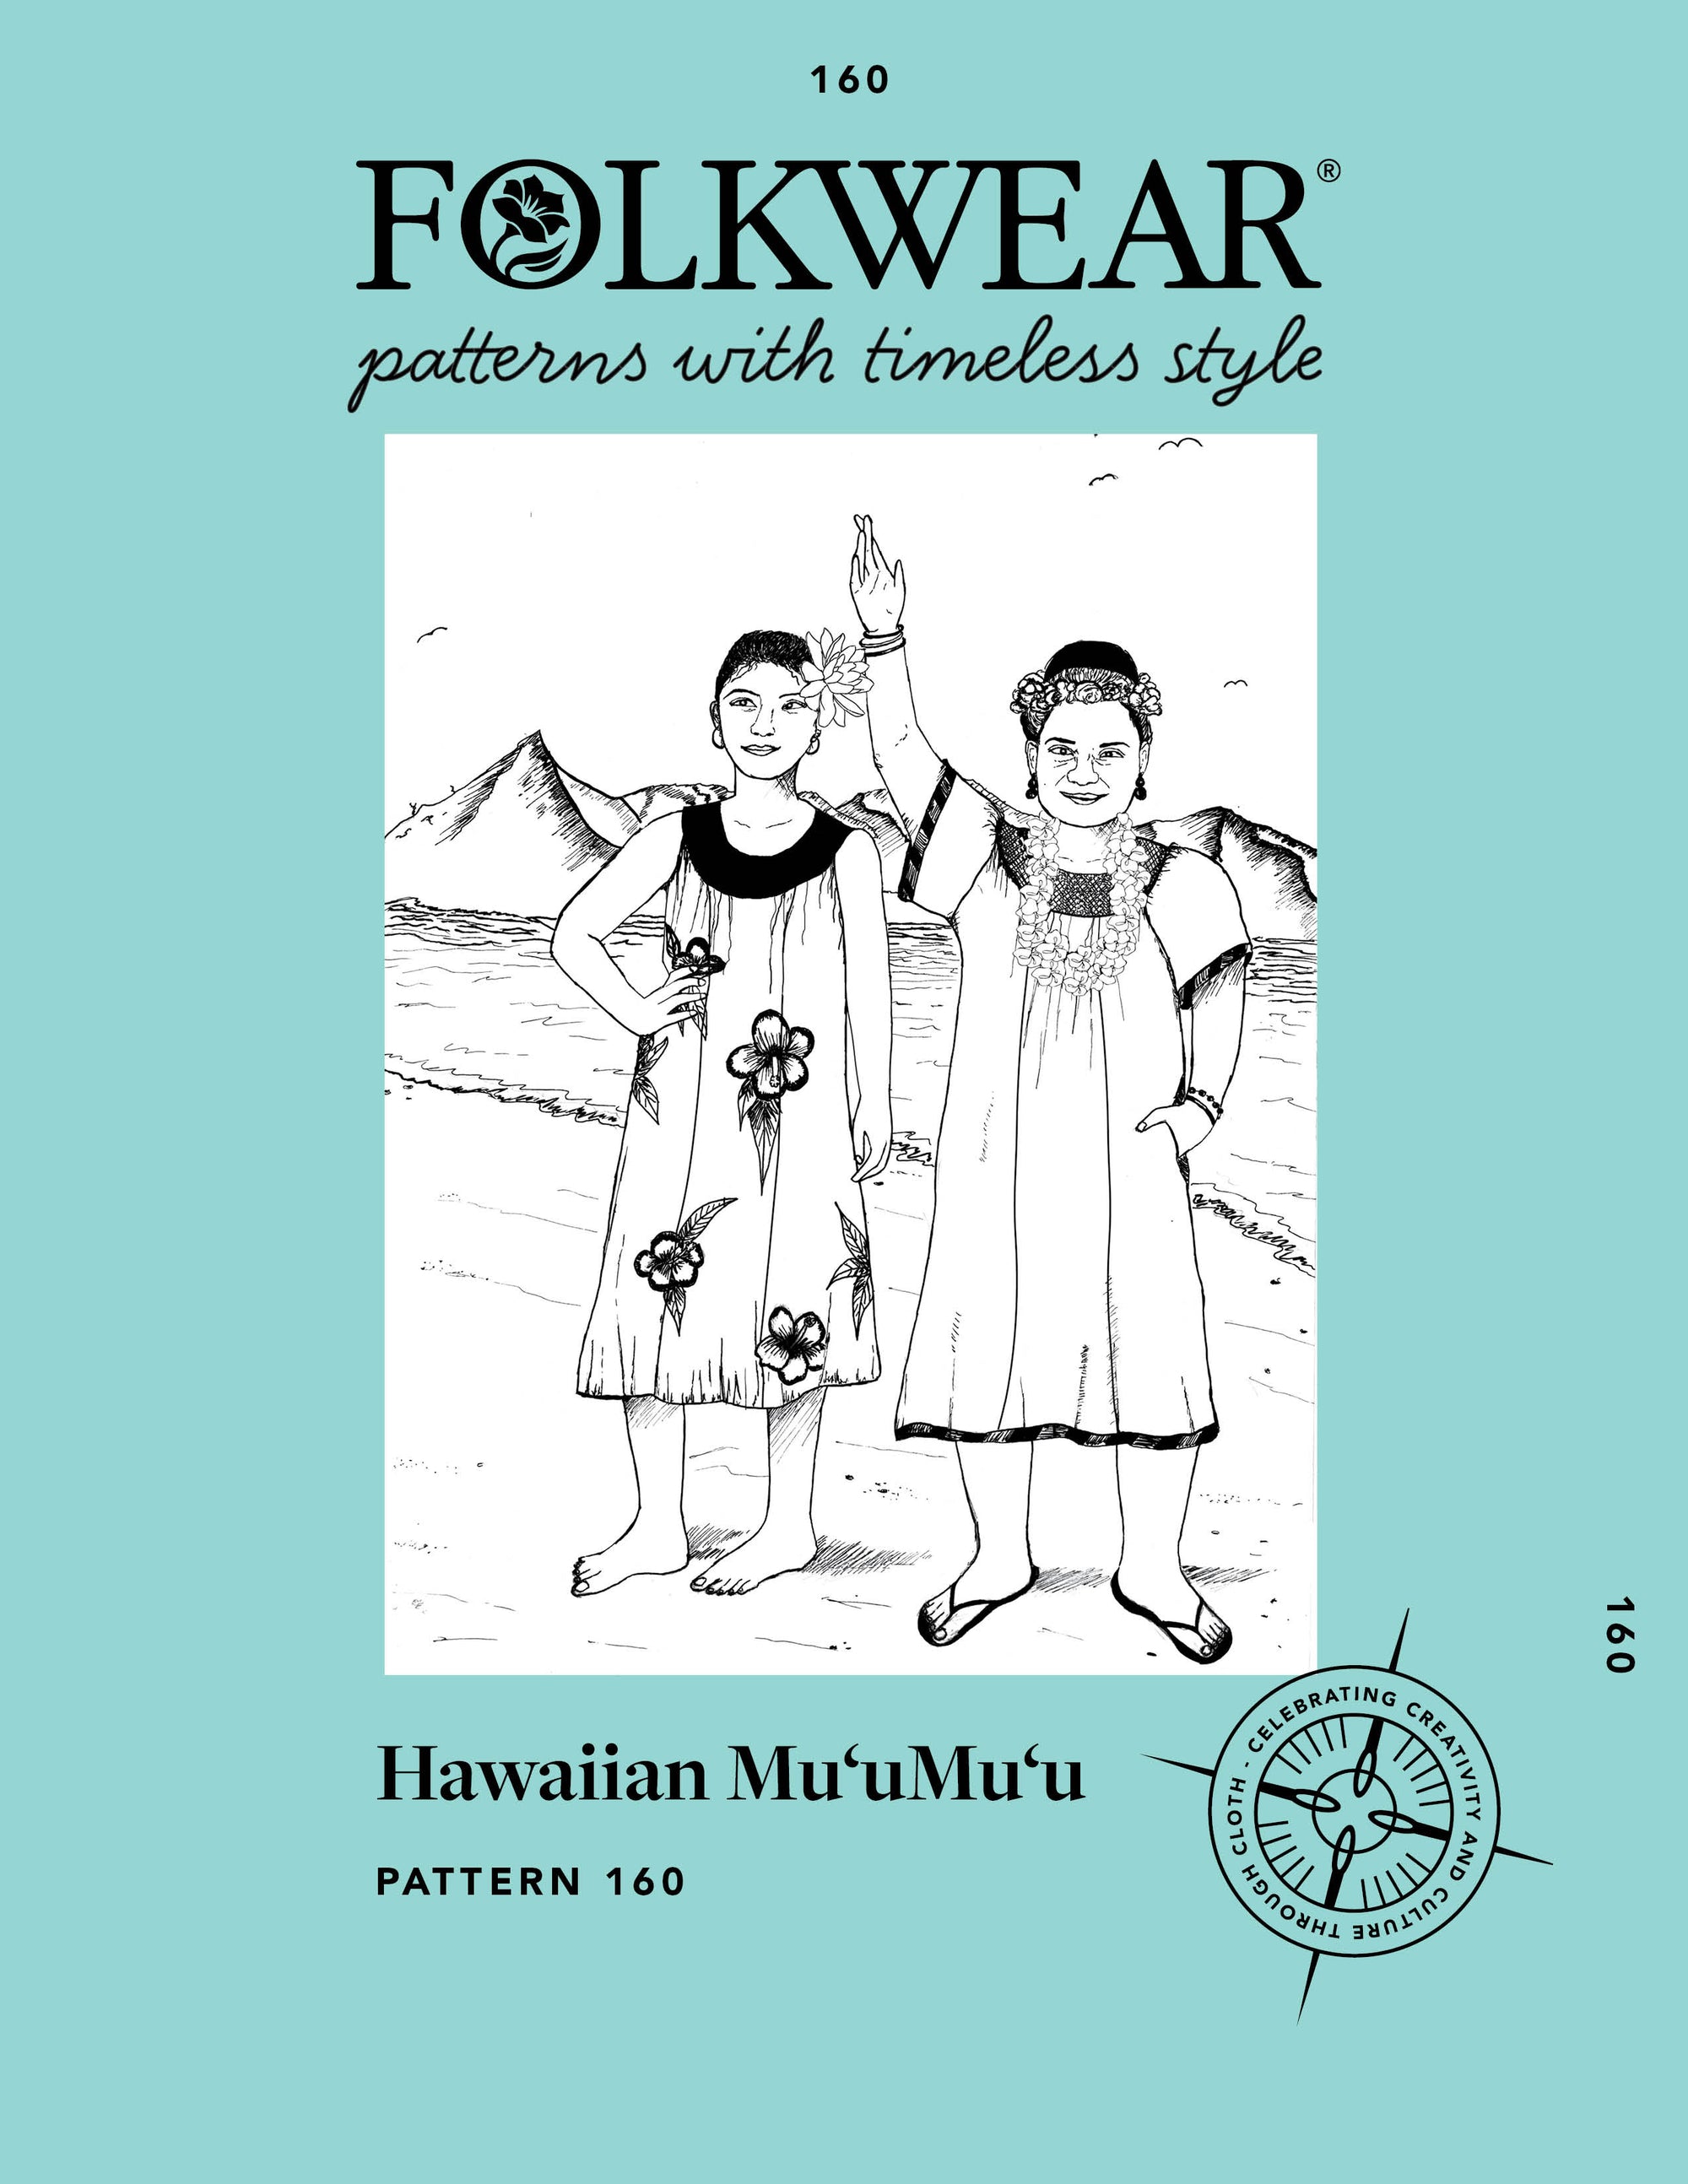 Front cover of the Hawaiian Muumuu pattern. Pen and ink illustration shows two women in muumuus, one with a raised hand.